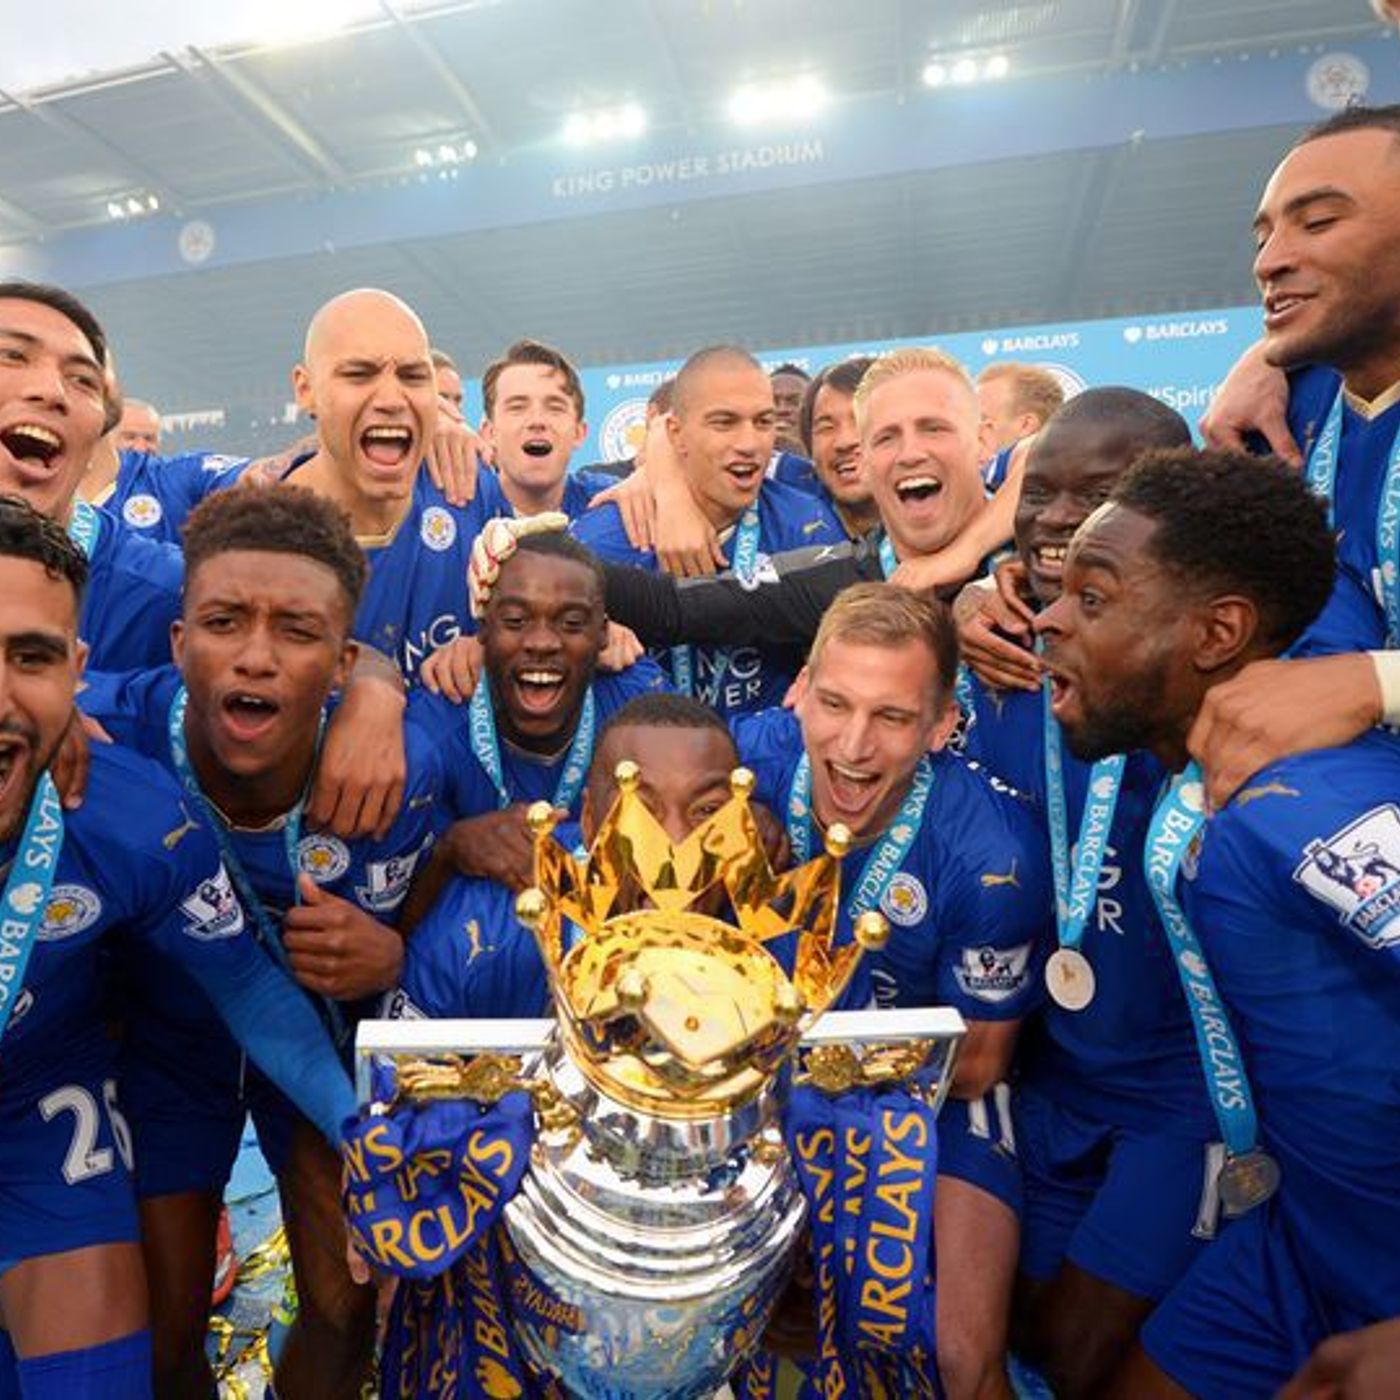 Seven Of The Best (7OTB) players to ever play for Leicester City